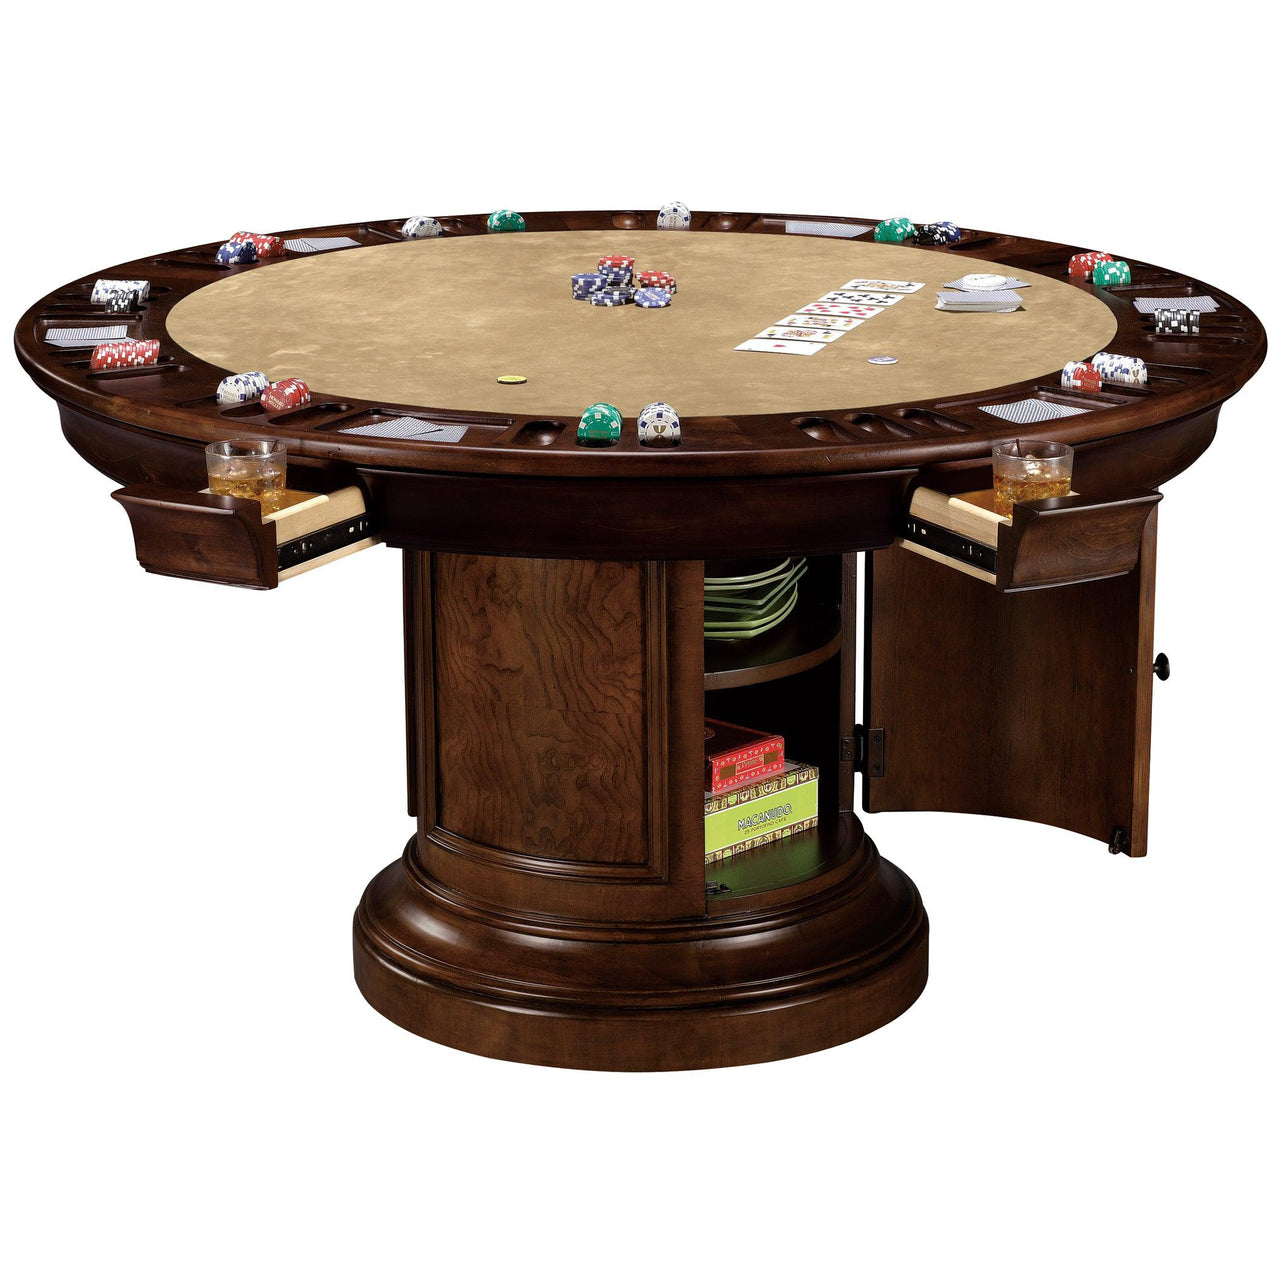 Howard Miller Poker and Dining Table Ithaca set with matching chairs-AMERICANA-POKER-TABLES